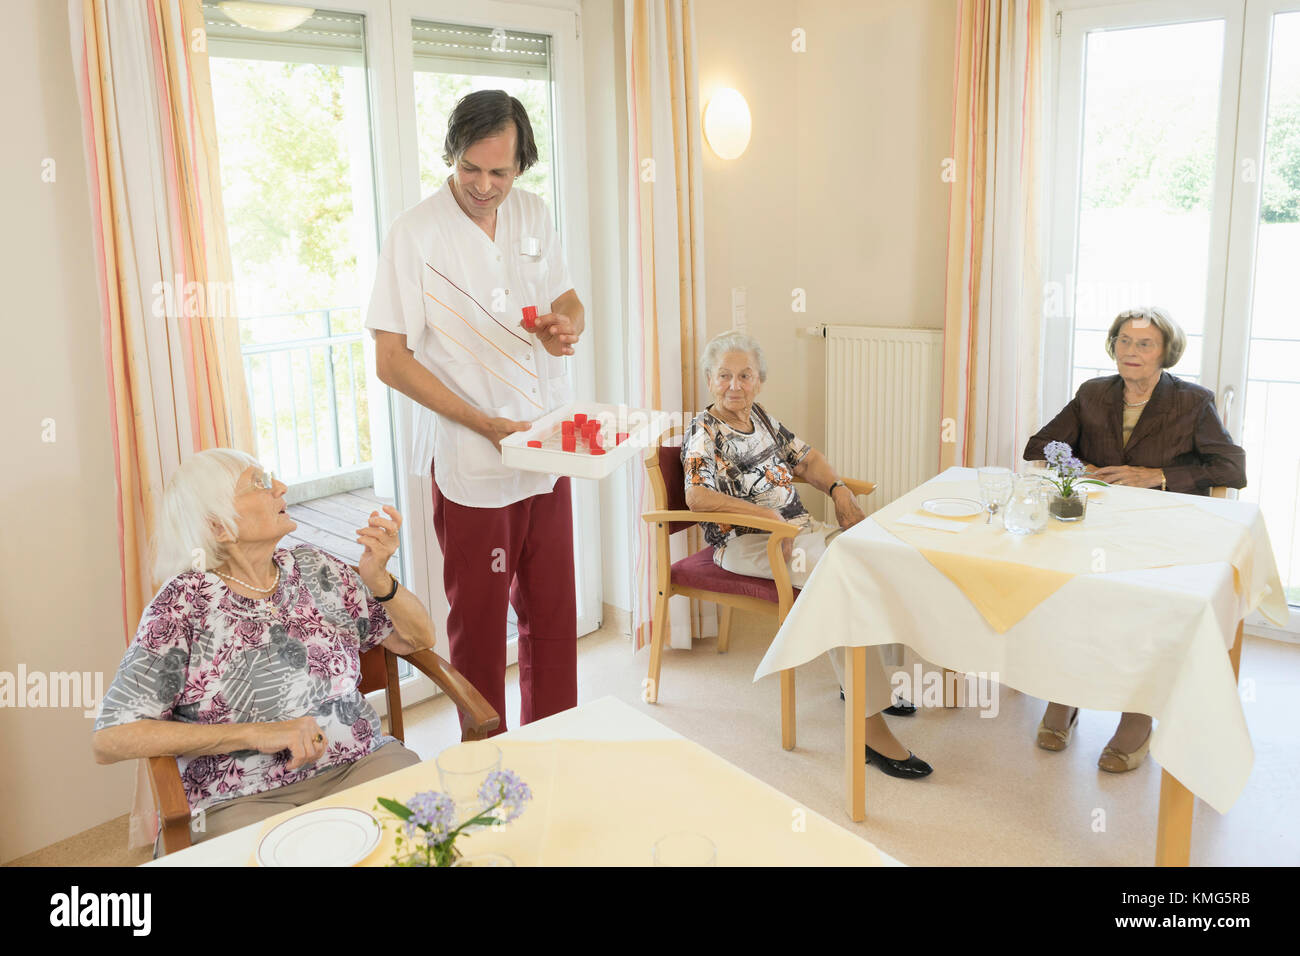 Caretaker giving medicine to senior woman at rest home Stock Photo